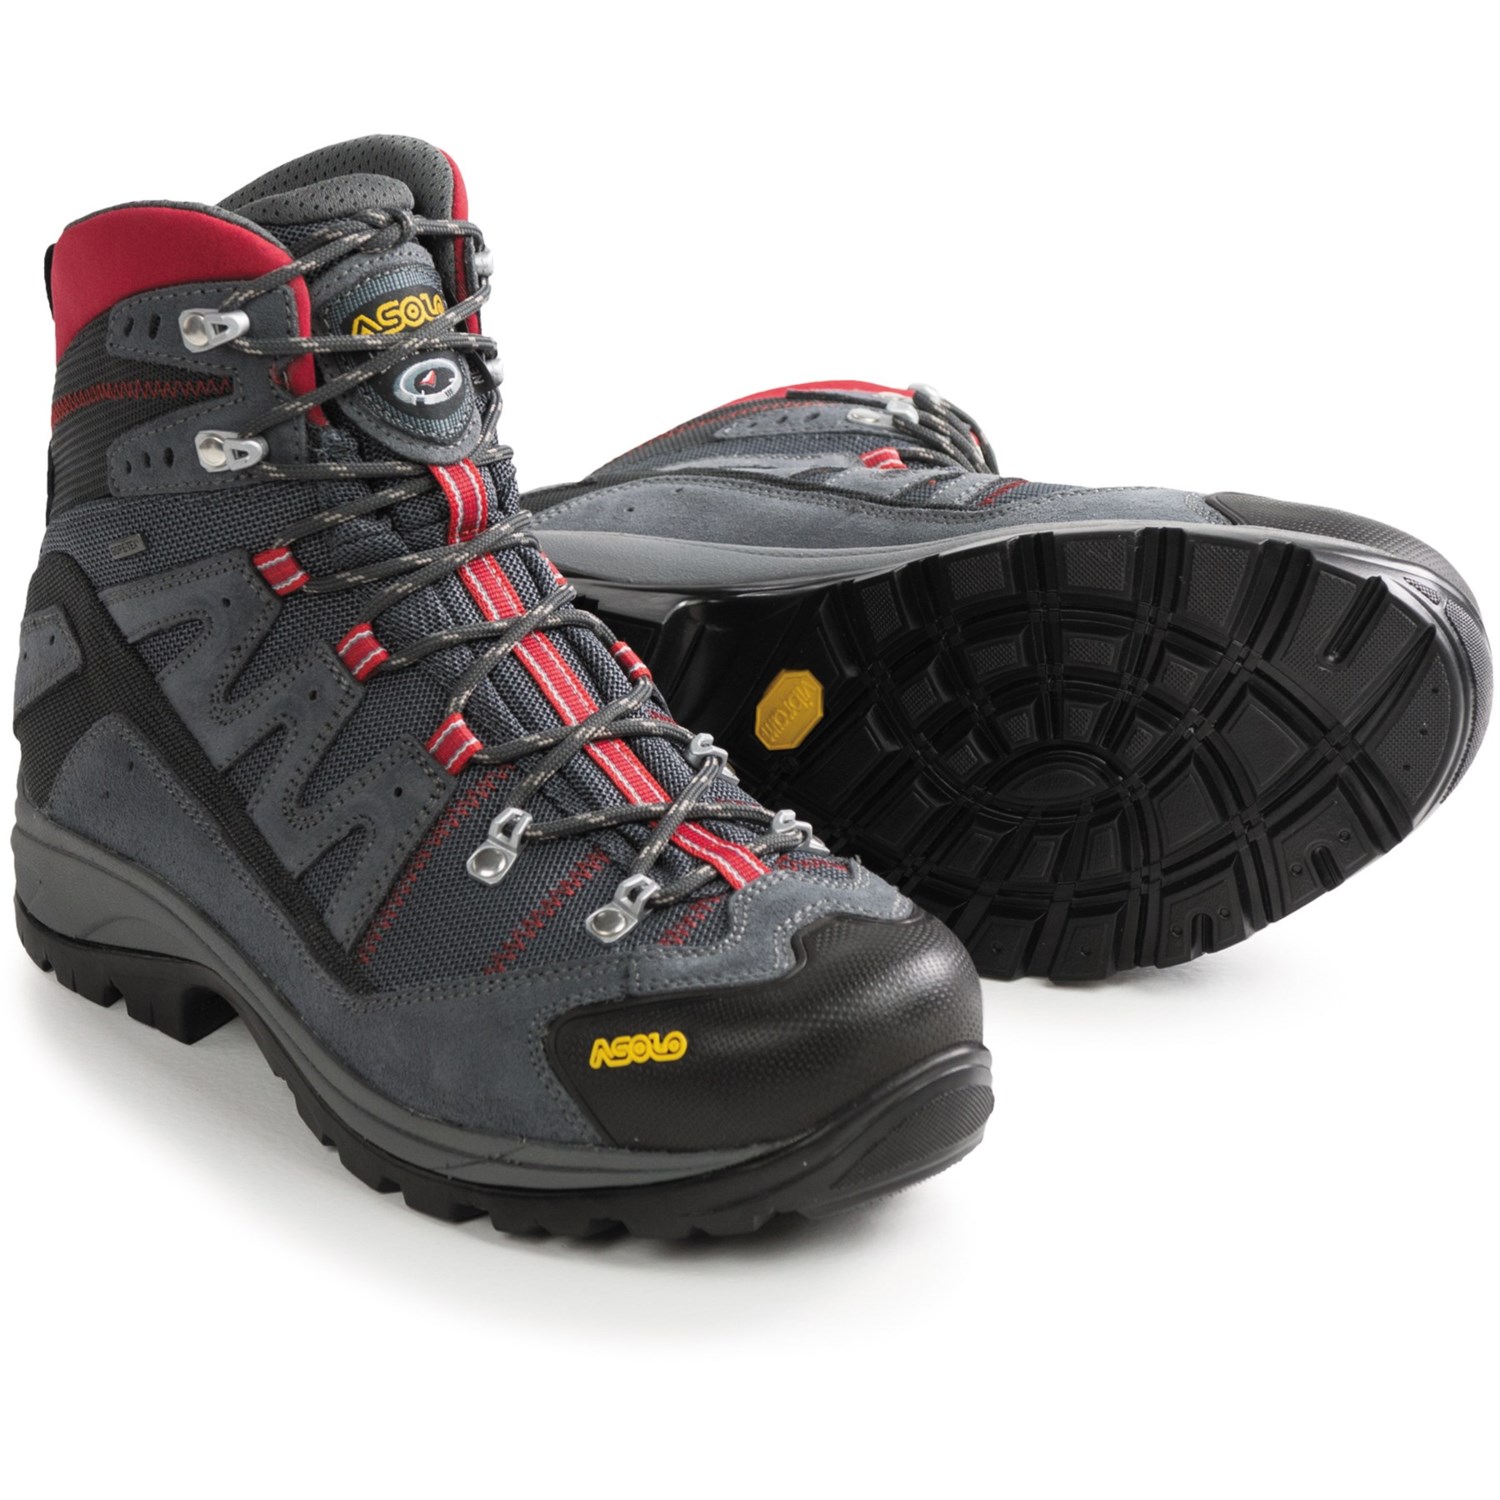 asolo boots hiking sneaker